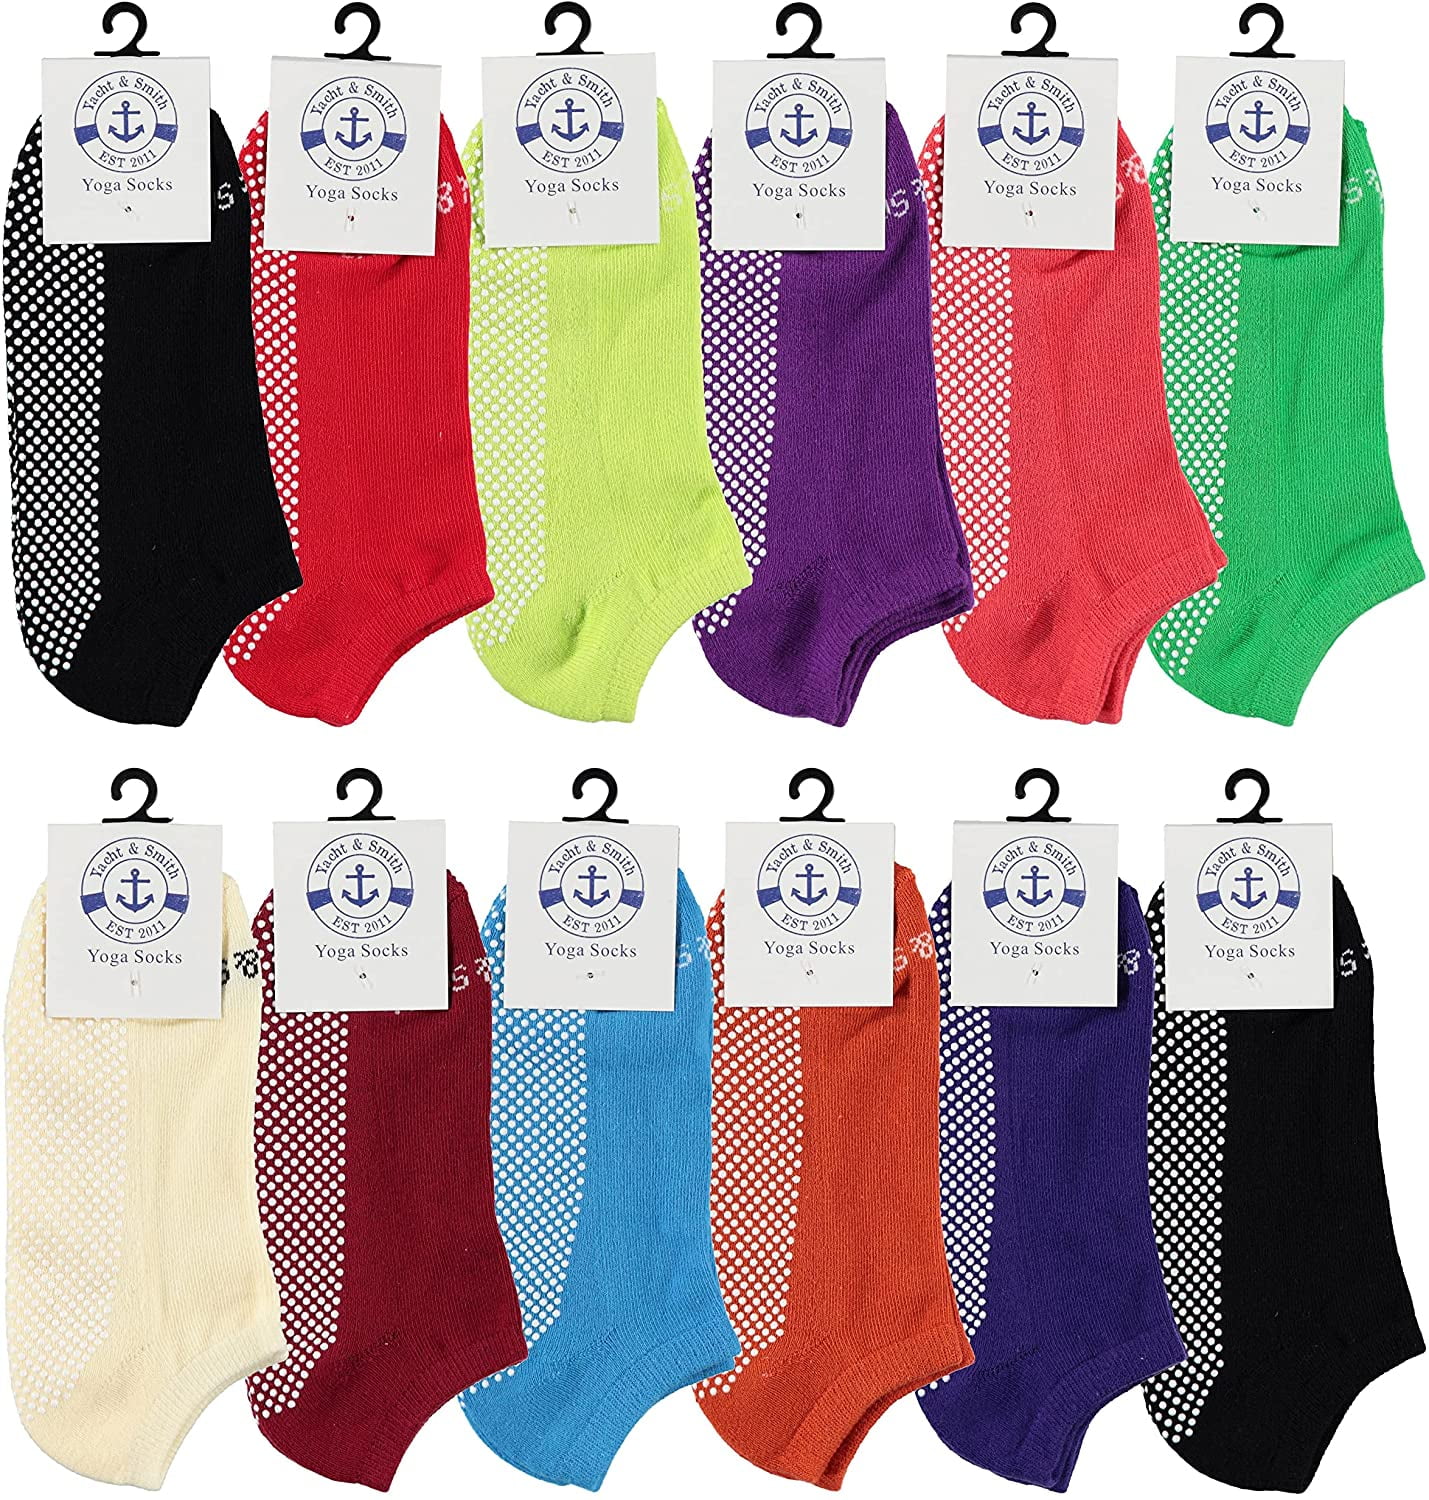 Women's Non Slip No-Skid Socks with Grips, 97% Cotton, For